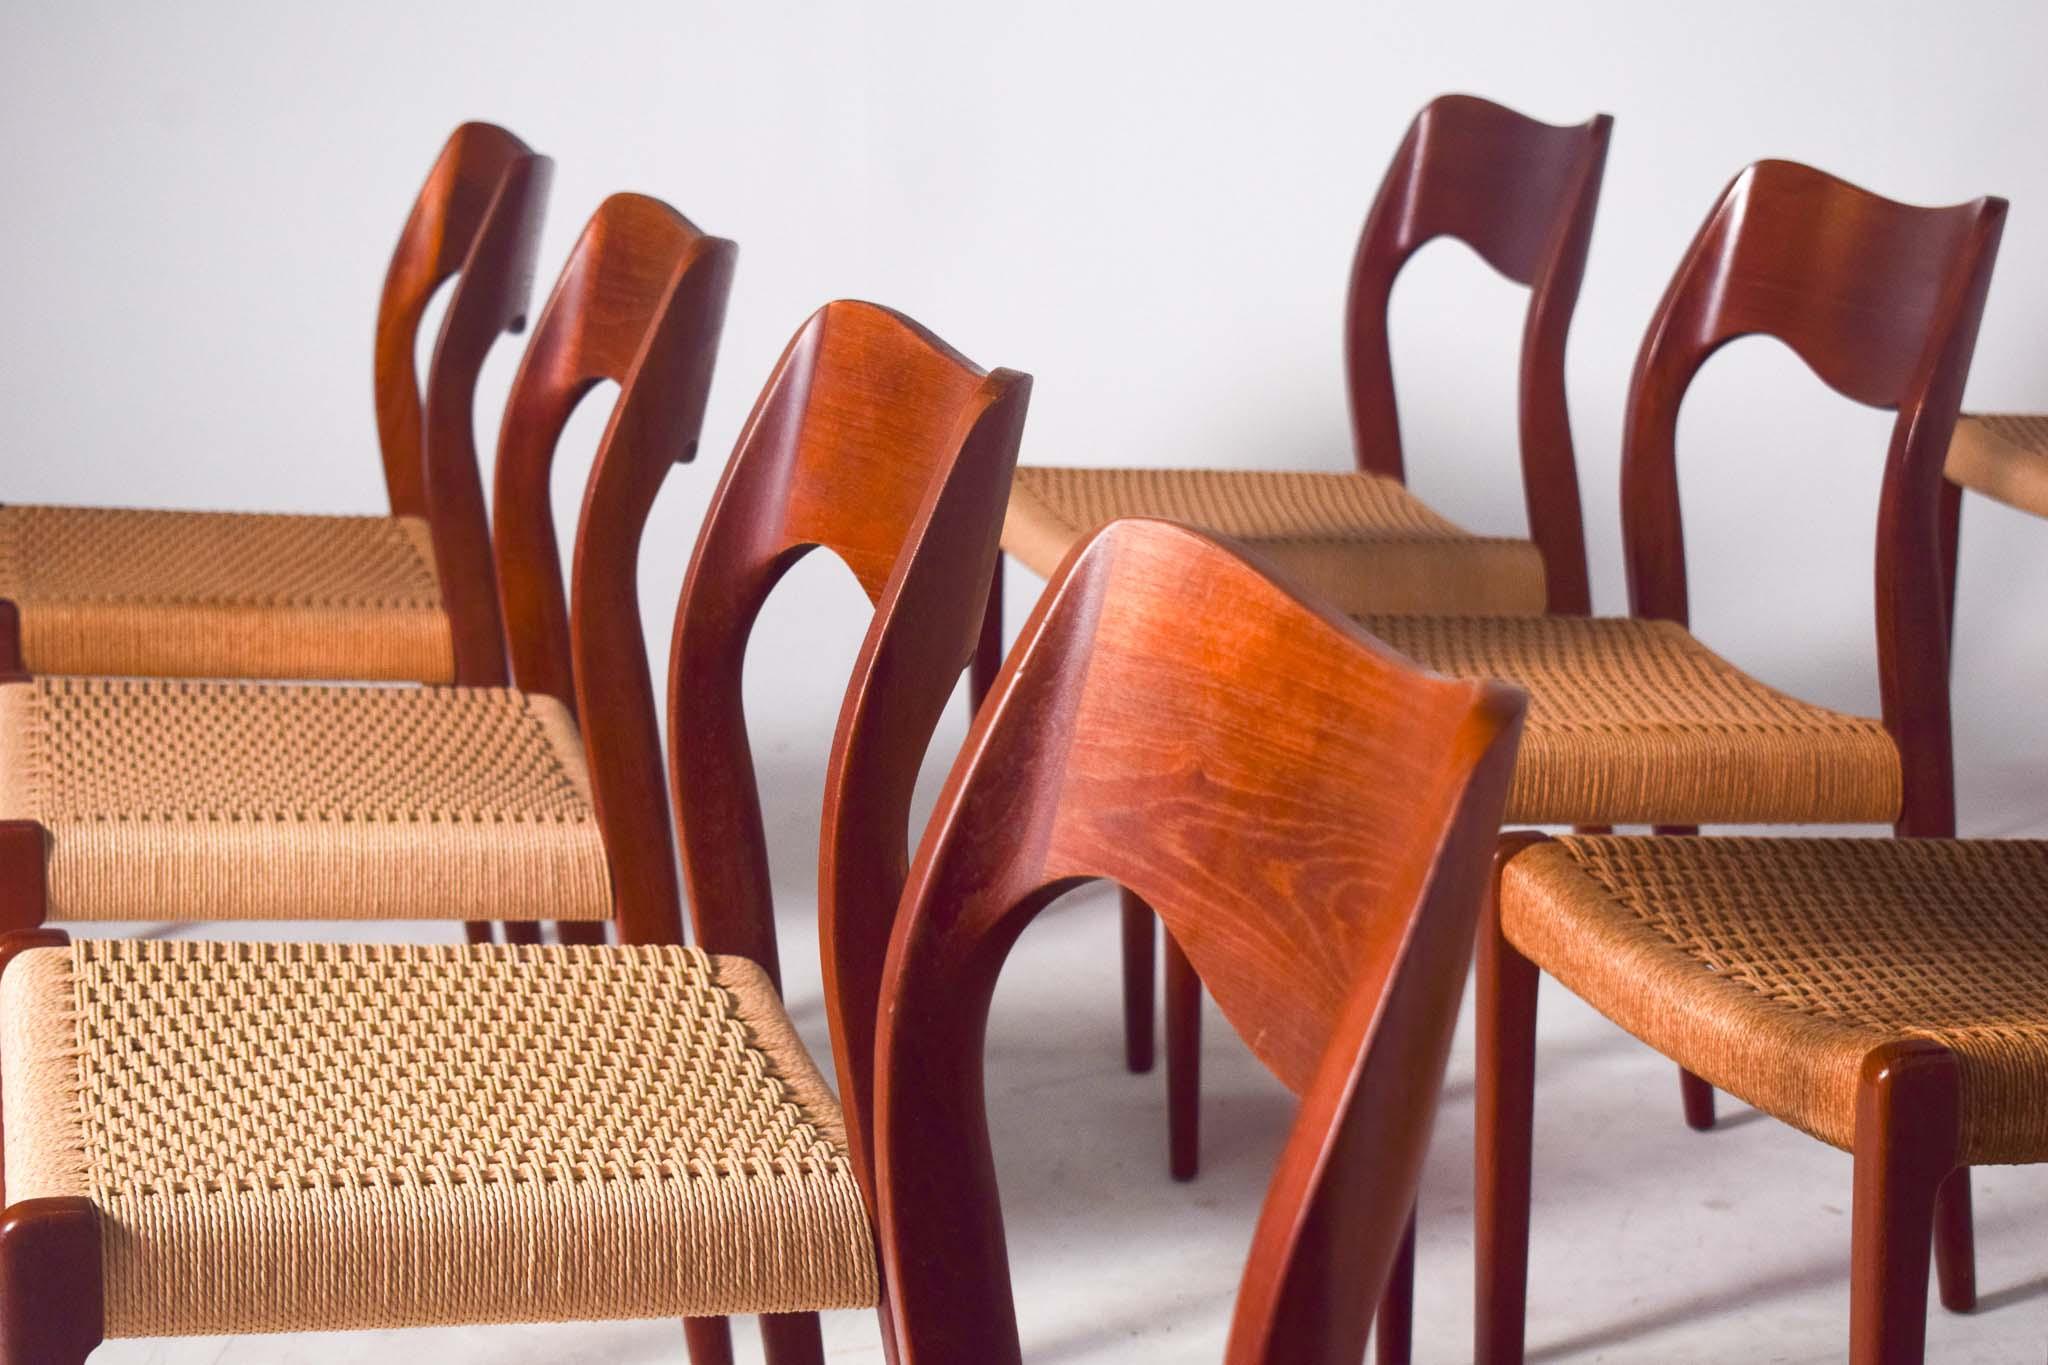 Niels O. Moller design, set of 12 dining chairs, model 71, teak, papercord upholstery, manufactured by J.L. Møller Mobelfabrik, Denmark, 1950s. The backs of the chairs features the iconic Møller waved back, showing subtle and beautiful lines curves.